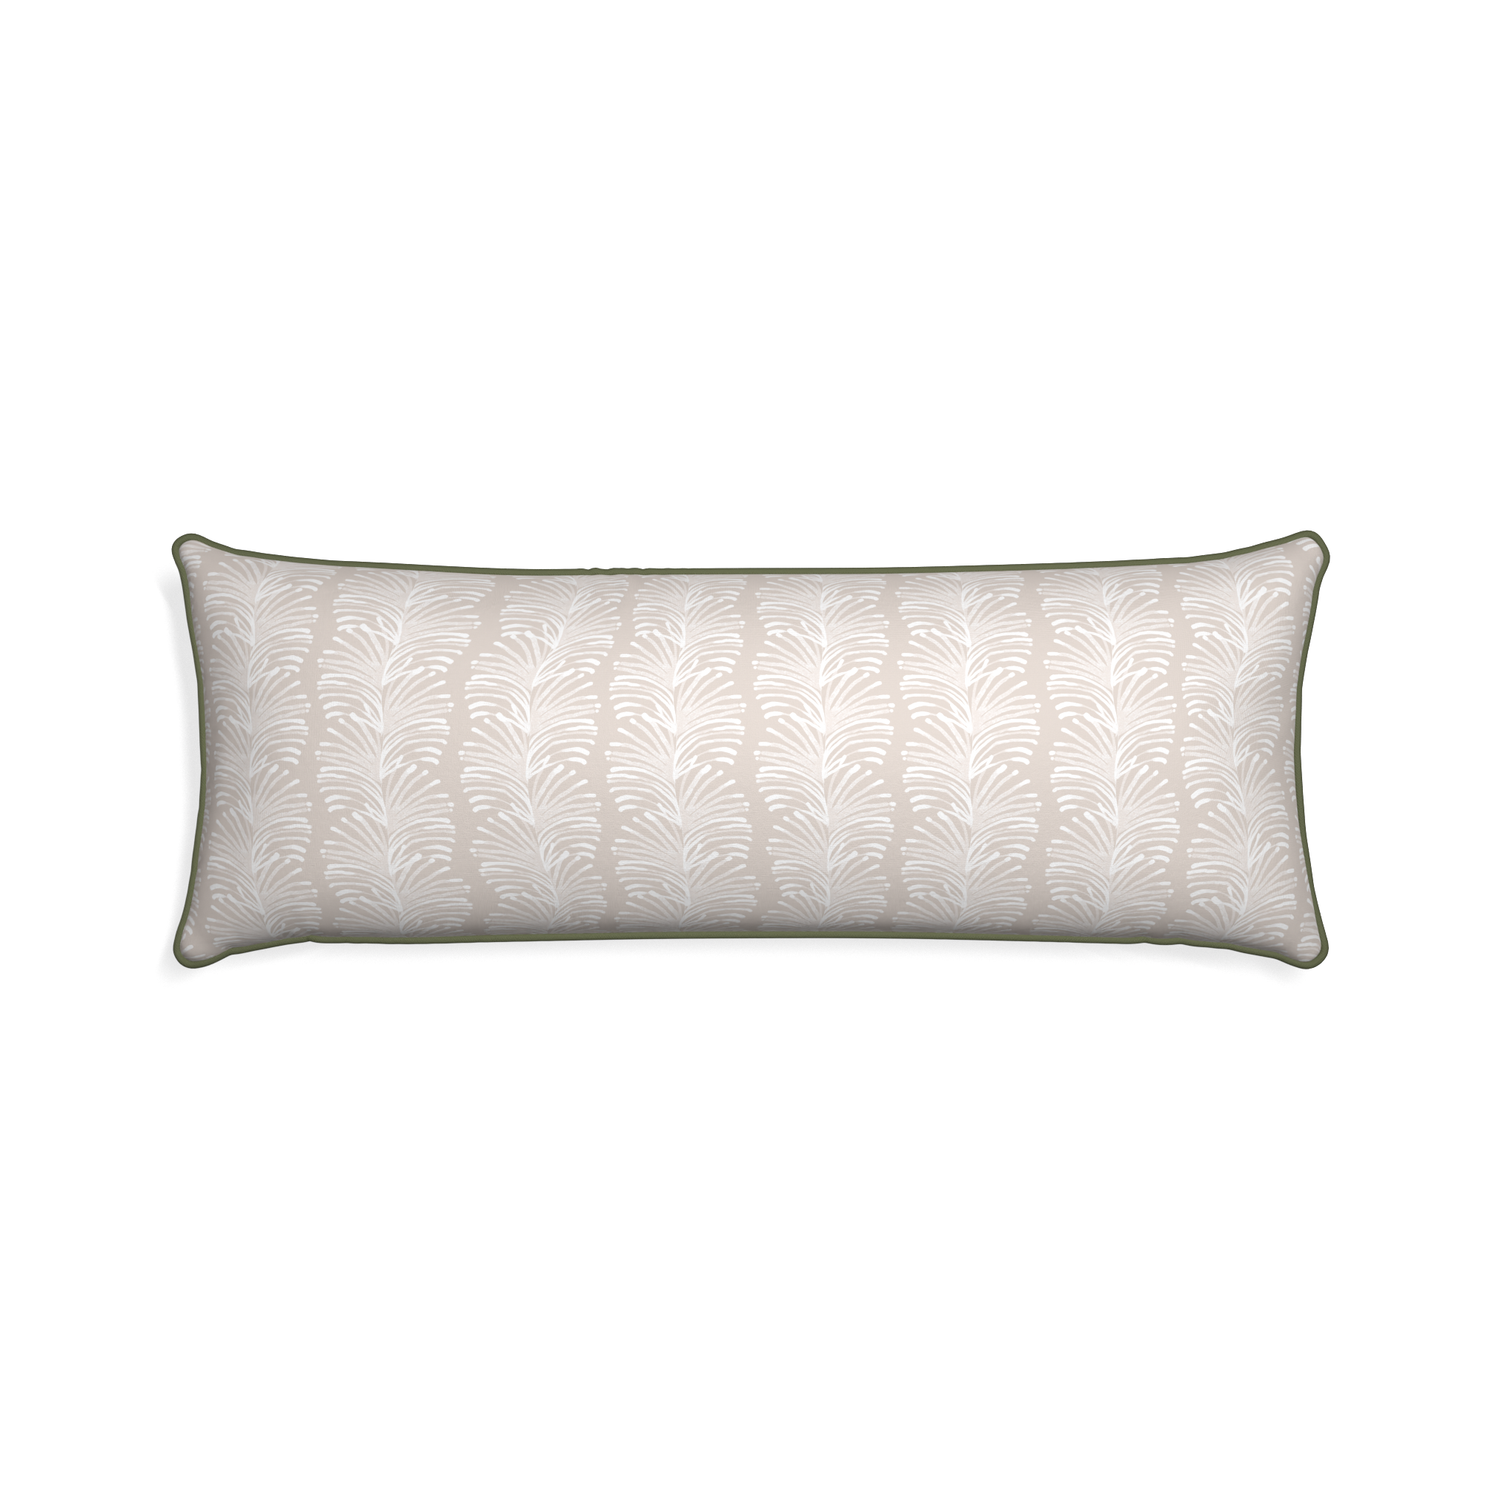 Xl-lumbar emma sand custom pillow with f piping on white background